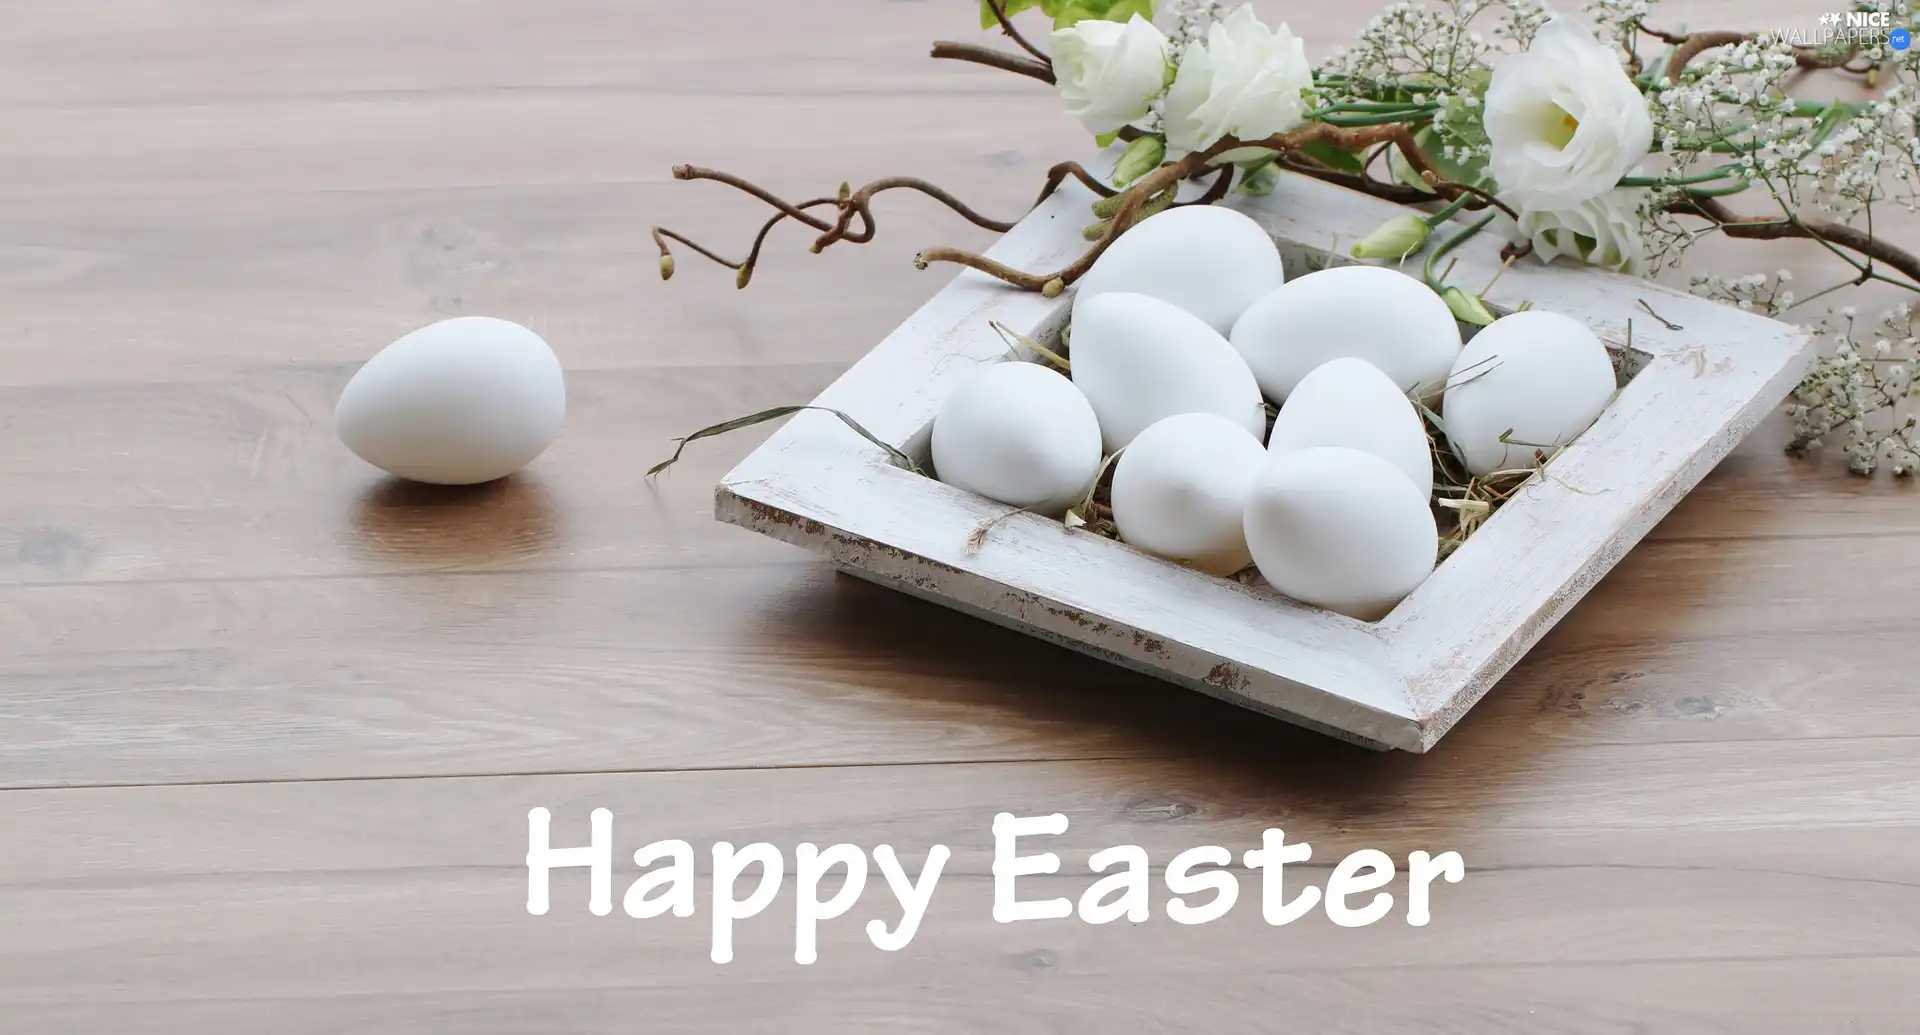 eggs, Easter, Flowers, Twigs, White, text